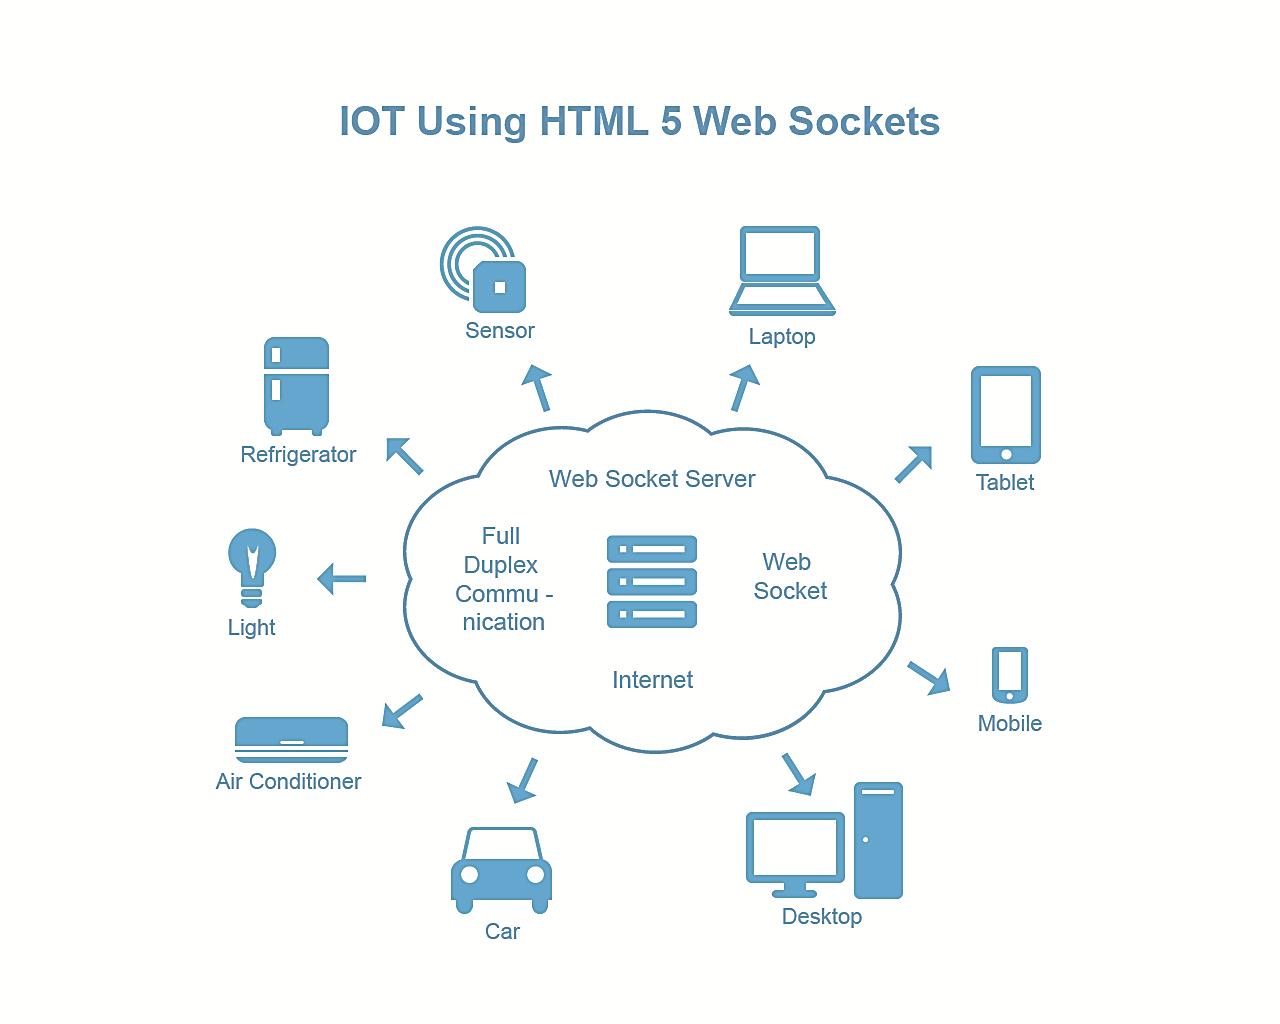 Using HTML5 Web Sockets for IoT